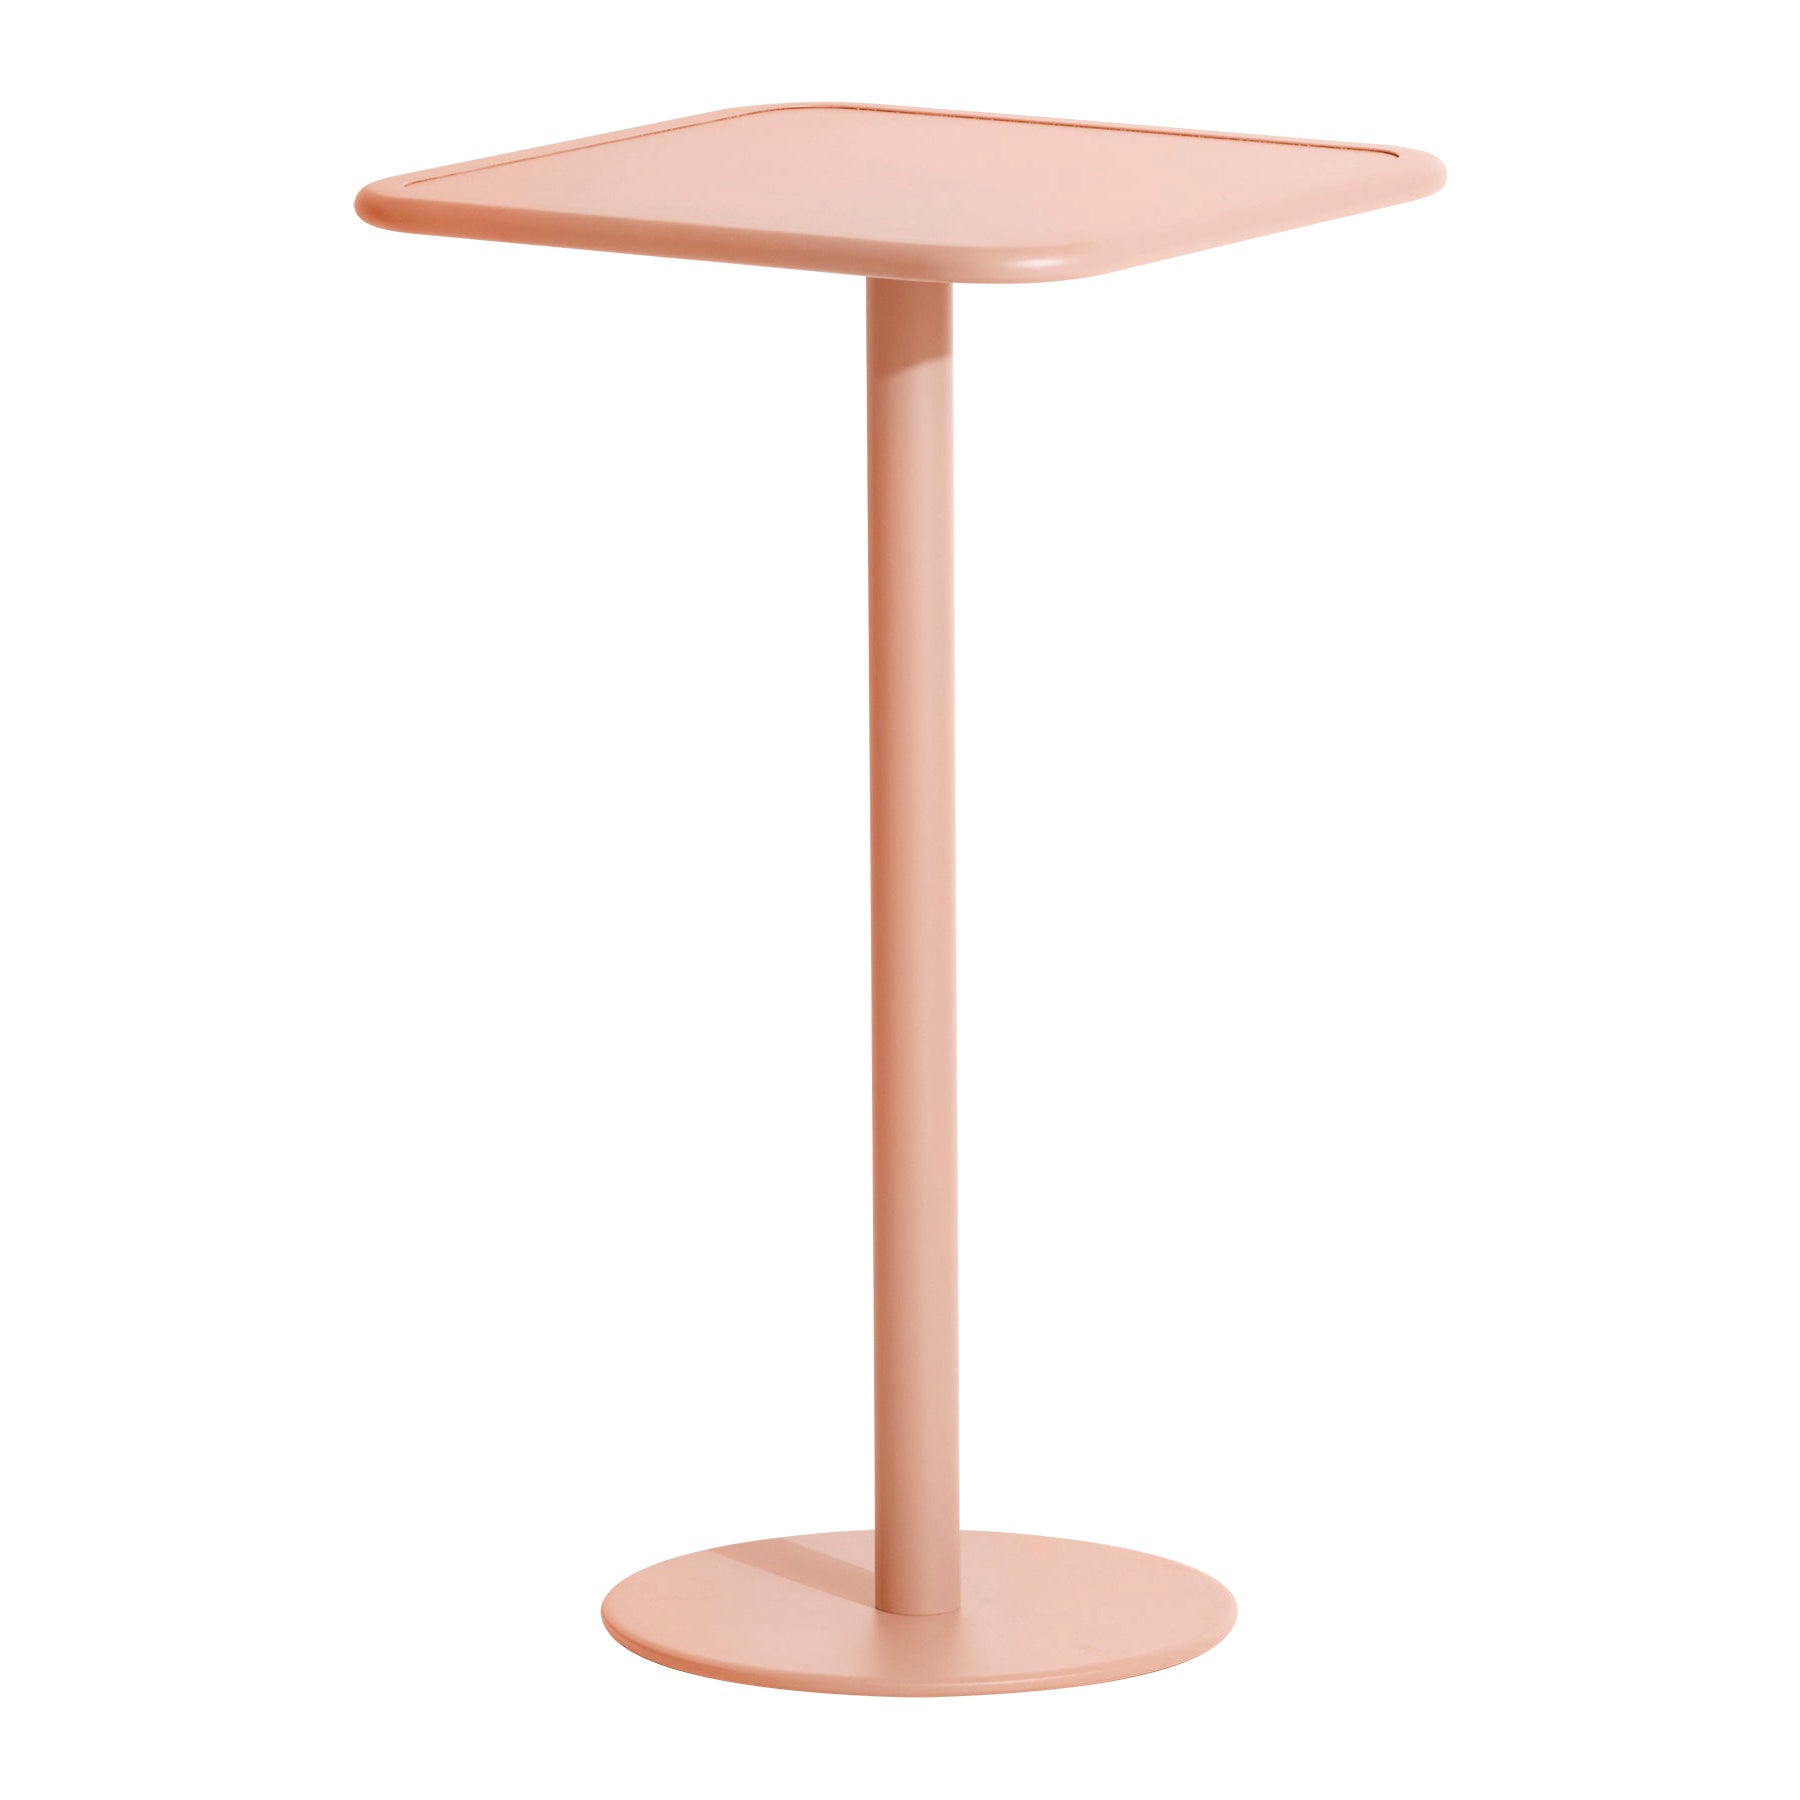 Petite Friture Week-End Square High Table in Blush Aluminium, 2017 For Sale